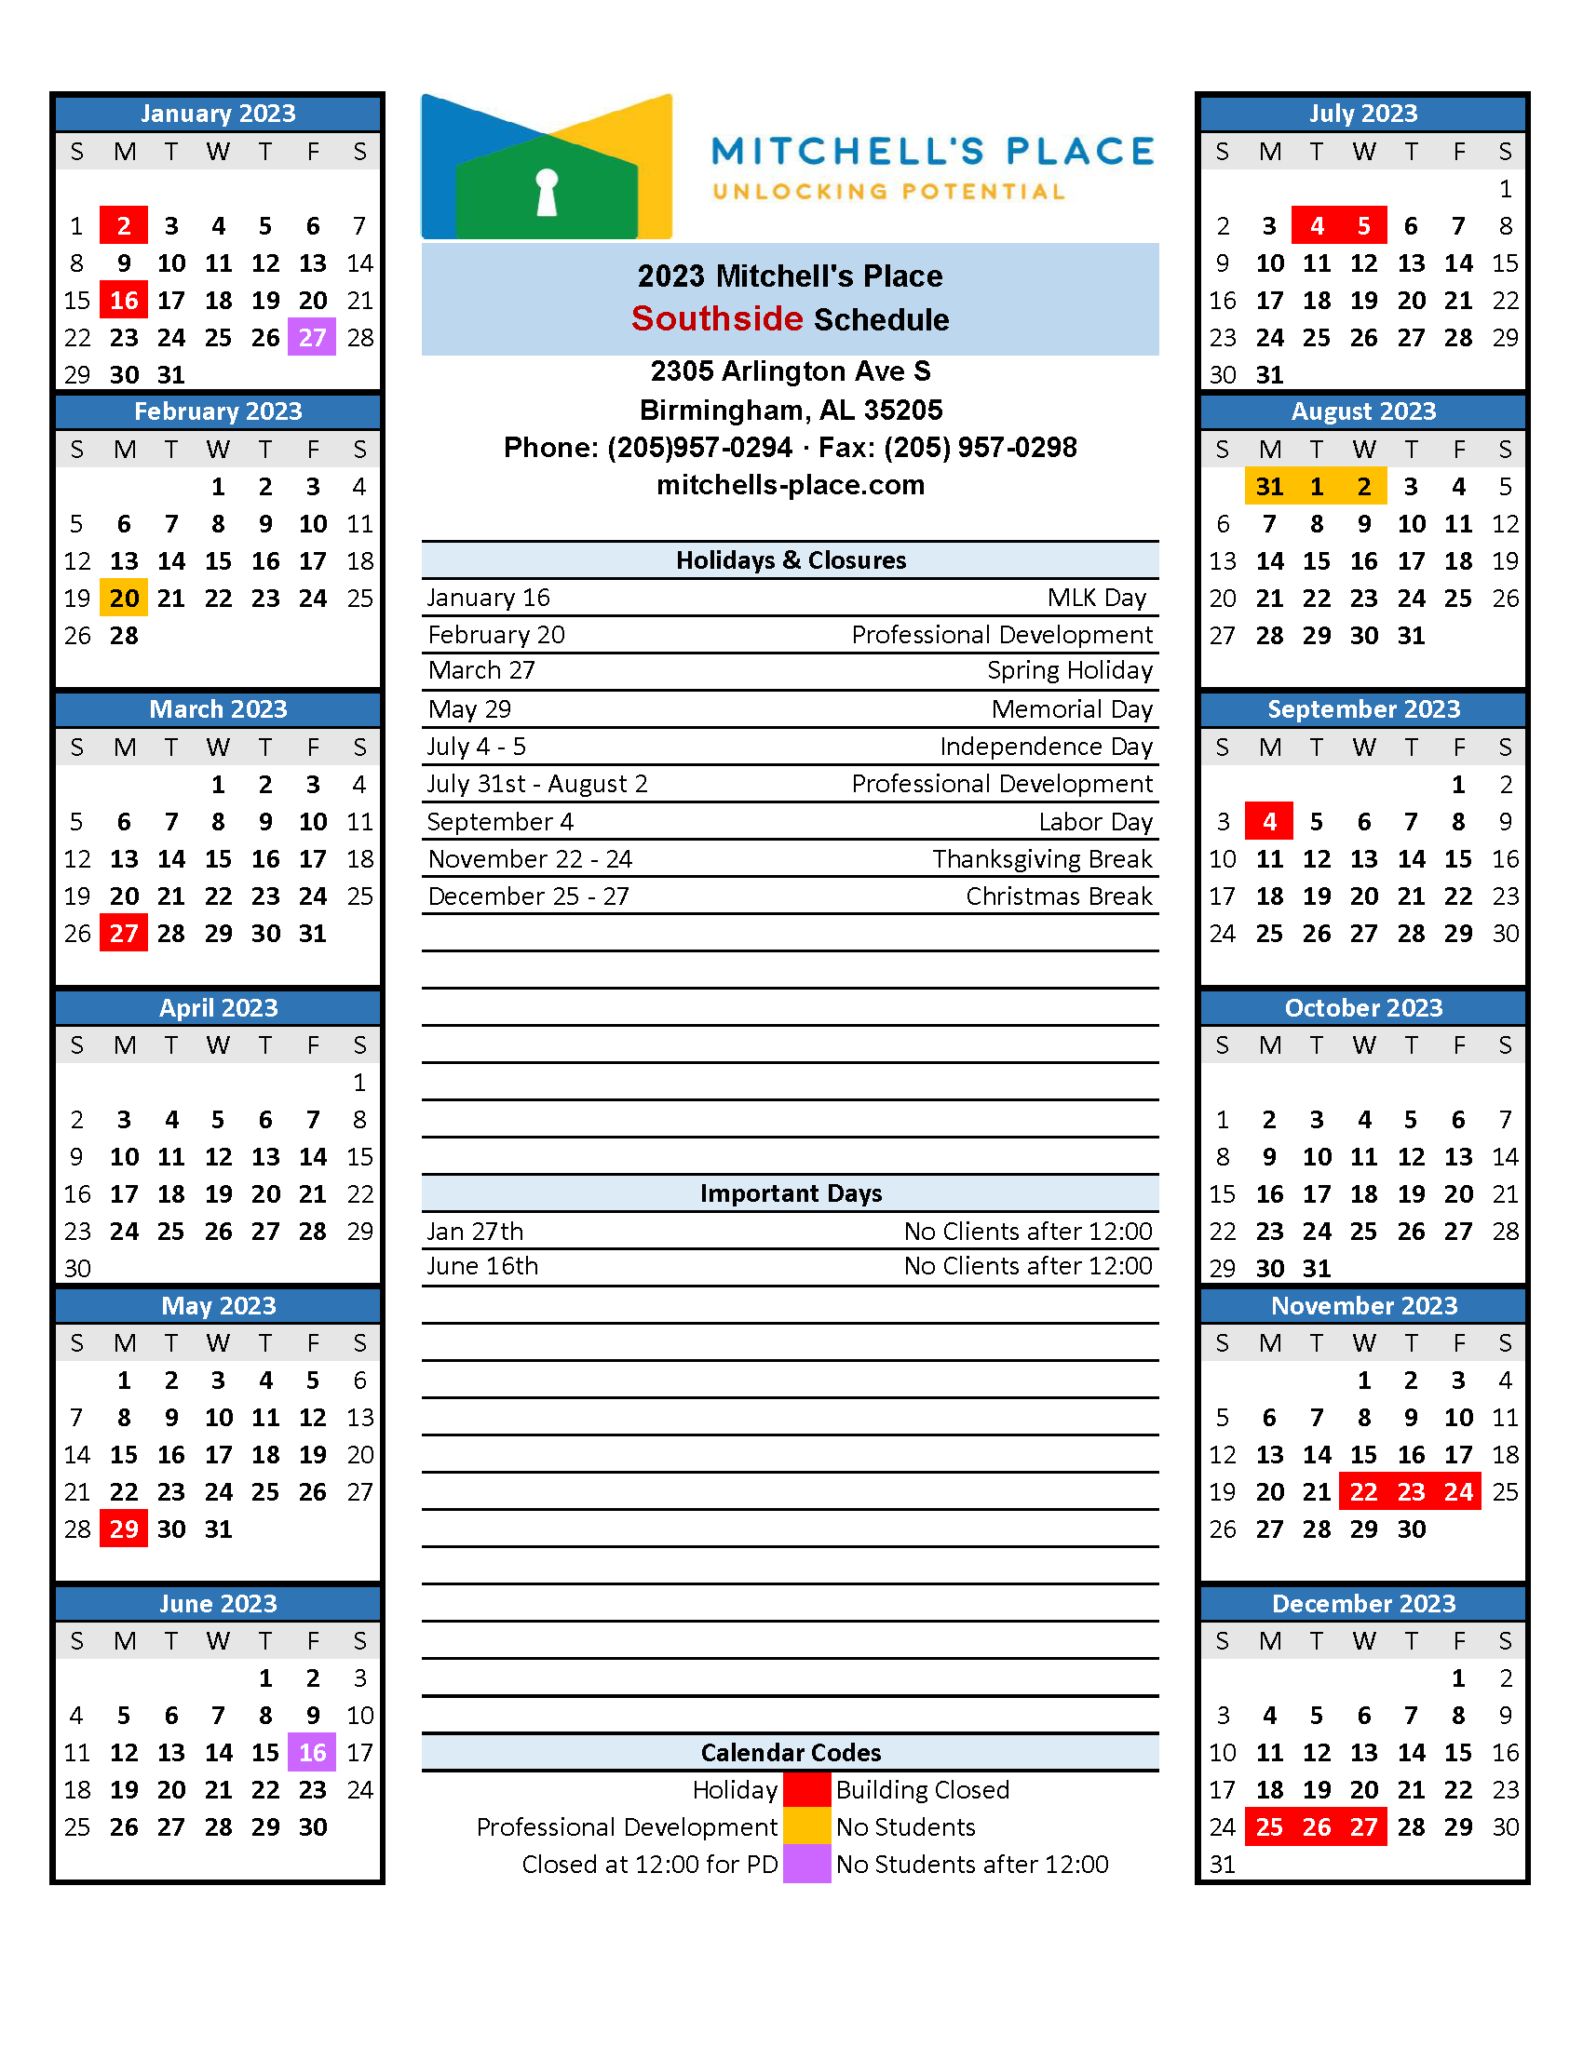 MP Schedules - Mitchell's Place